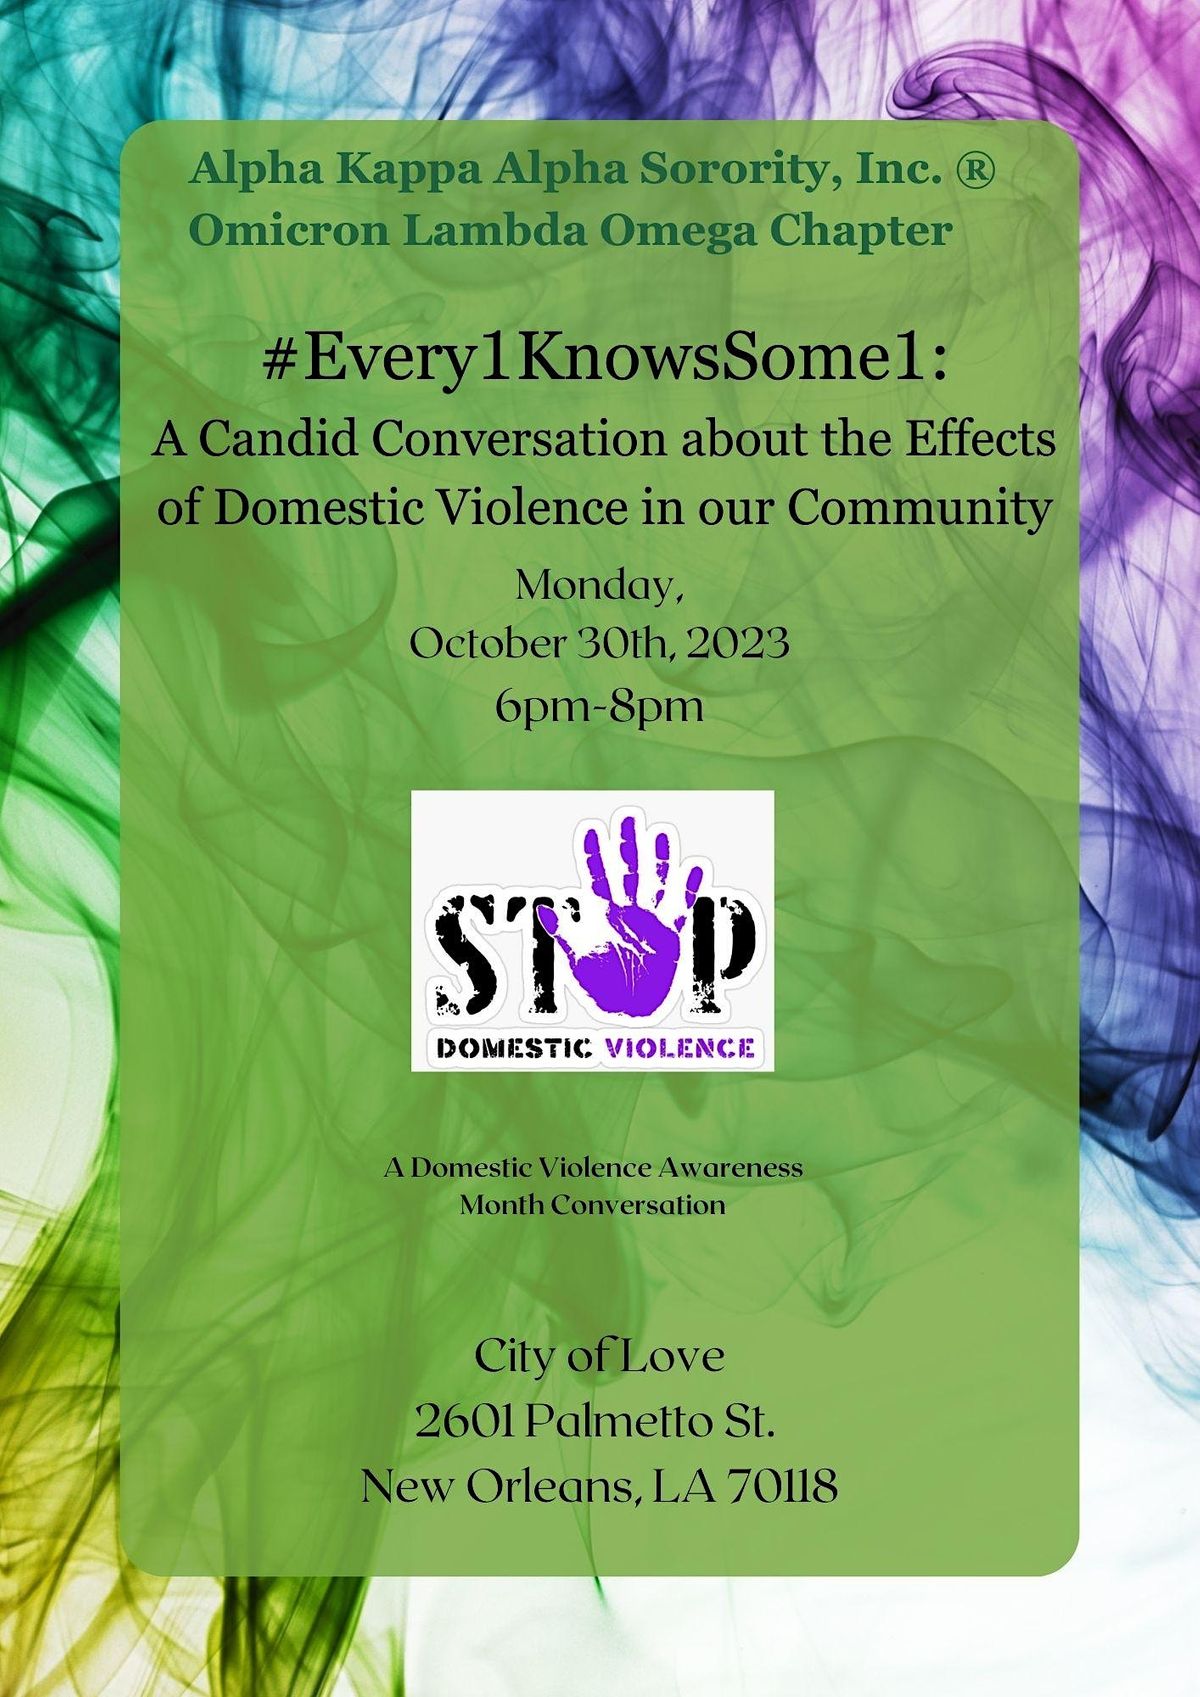 #Every1KnowsSome1: A Conversation about the Effects of Domestic Violence